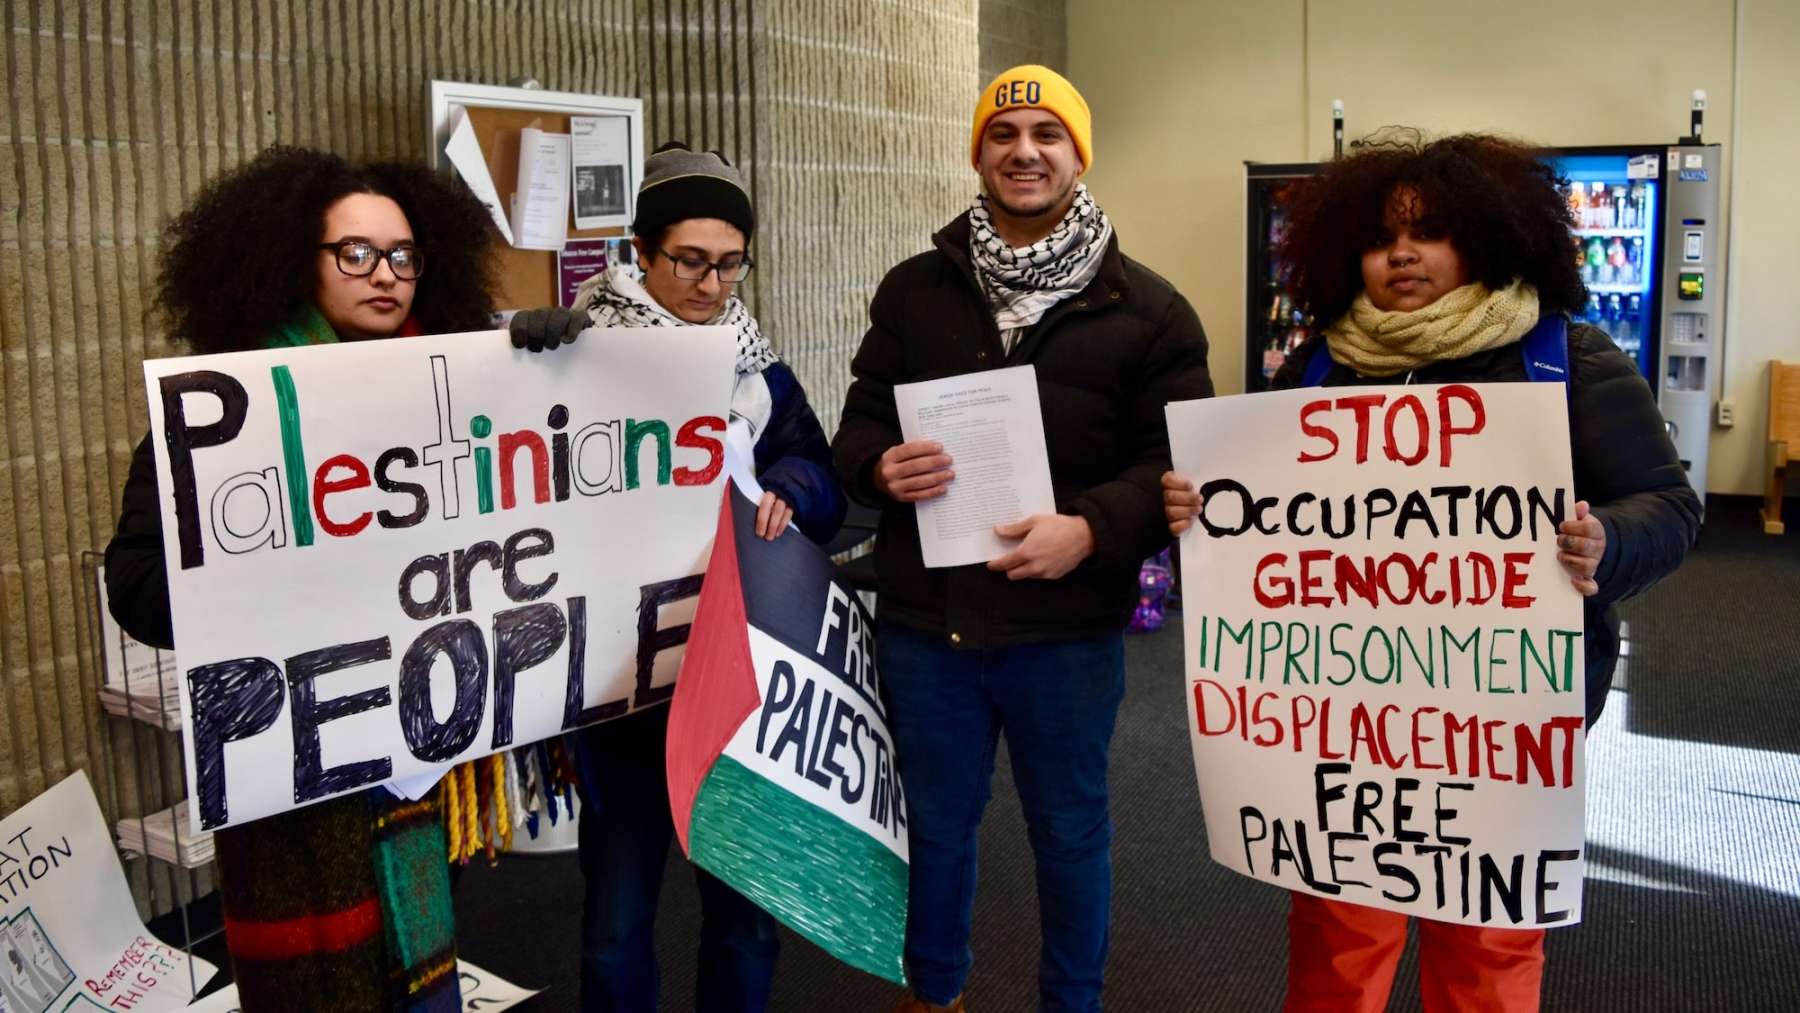 Rhode Island News: Student protesters target anti-Palestine talk on RIC campus